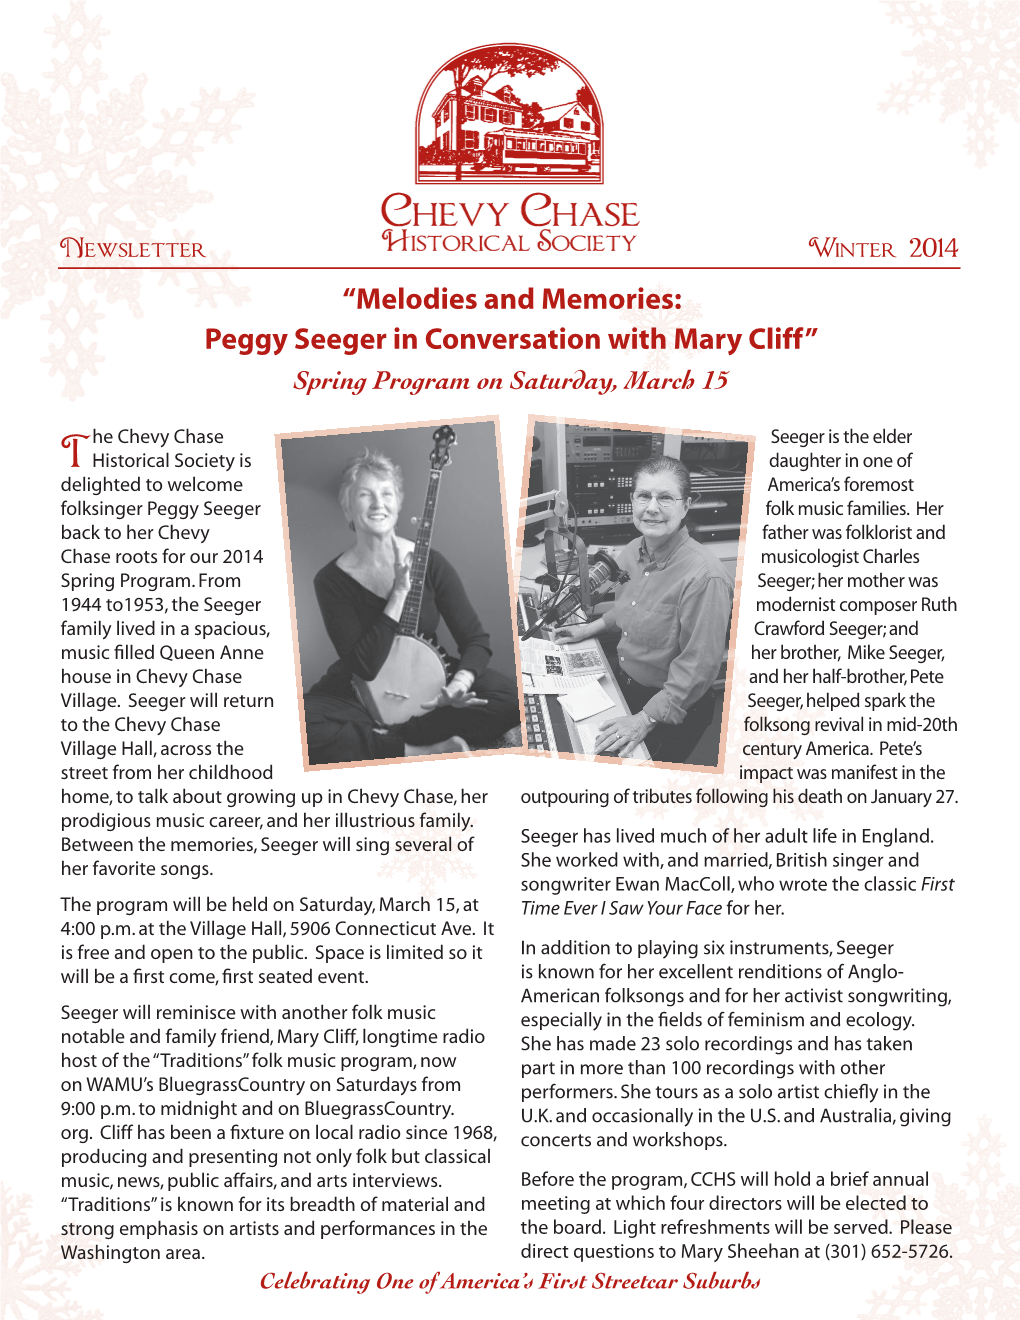 “Melodies and Memories: Peggy Seeger in Conversation with Mary Cliff” Spring Program on Saturday, March 15